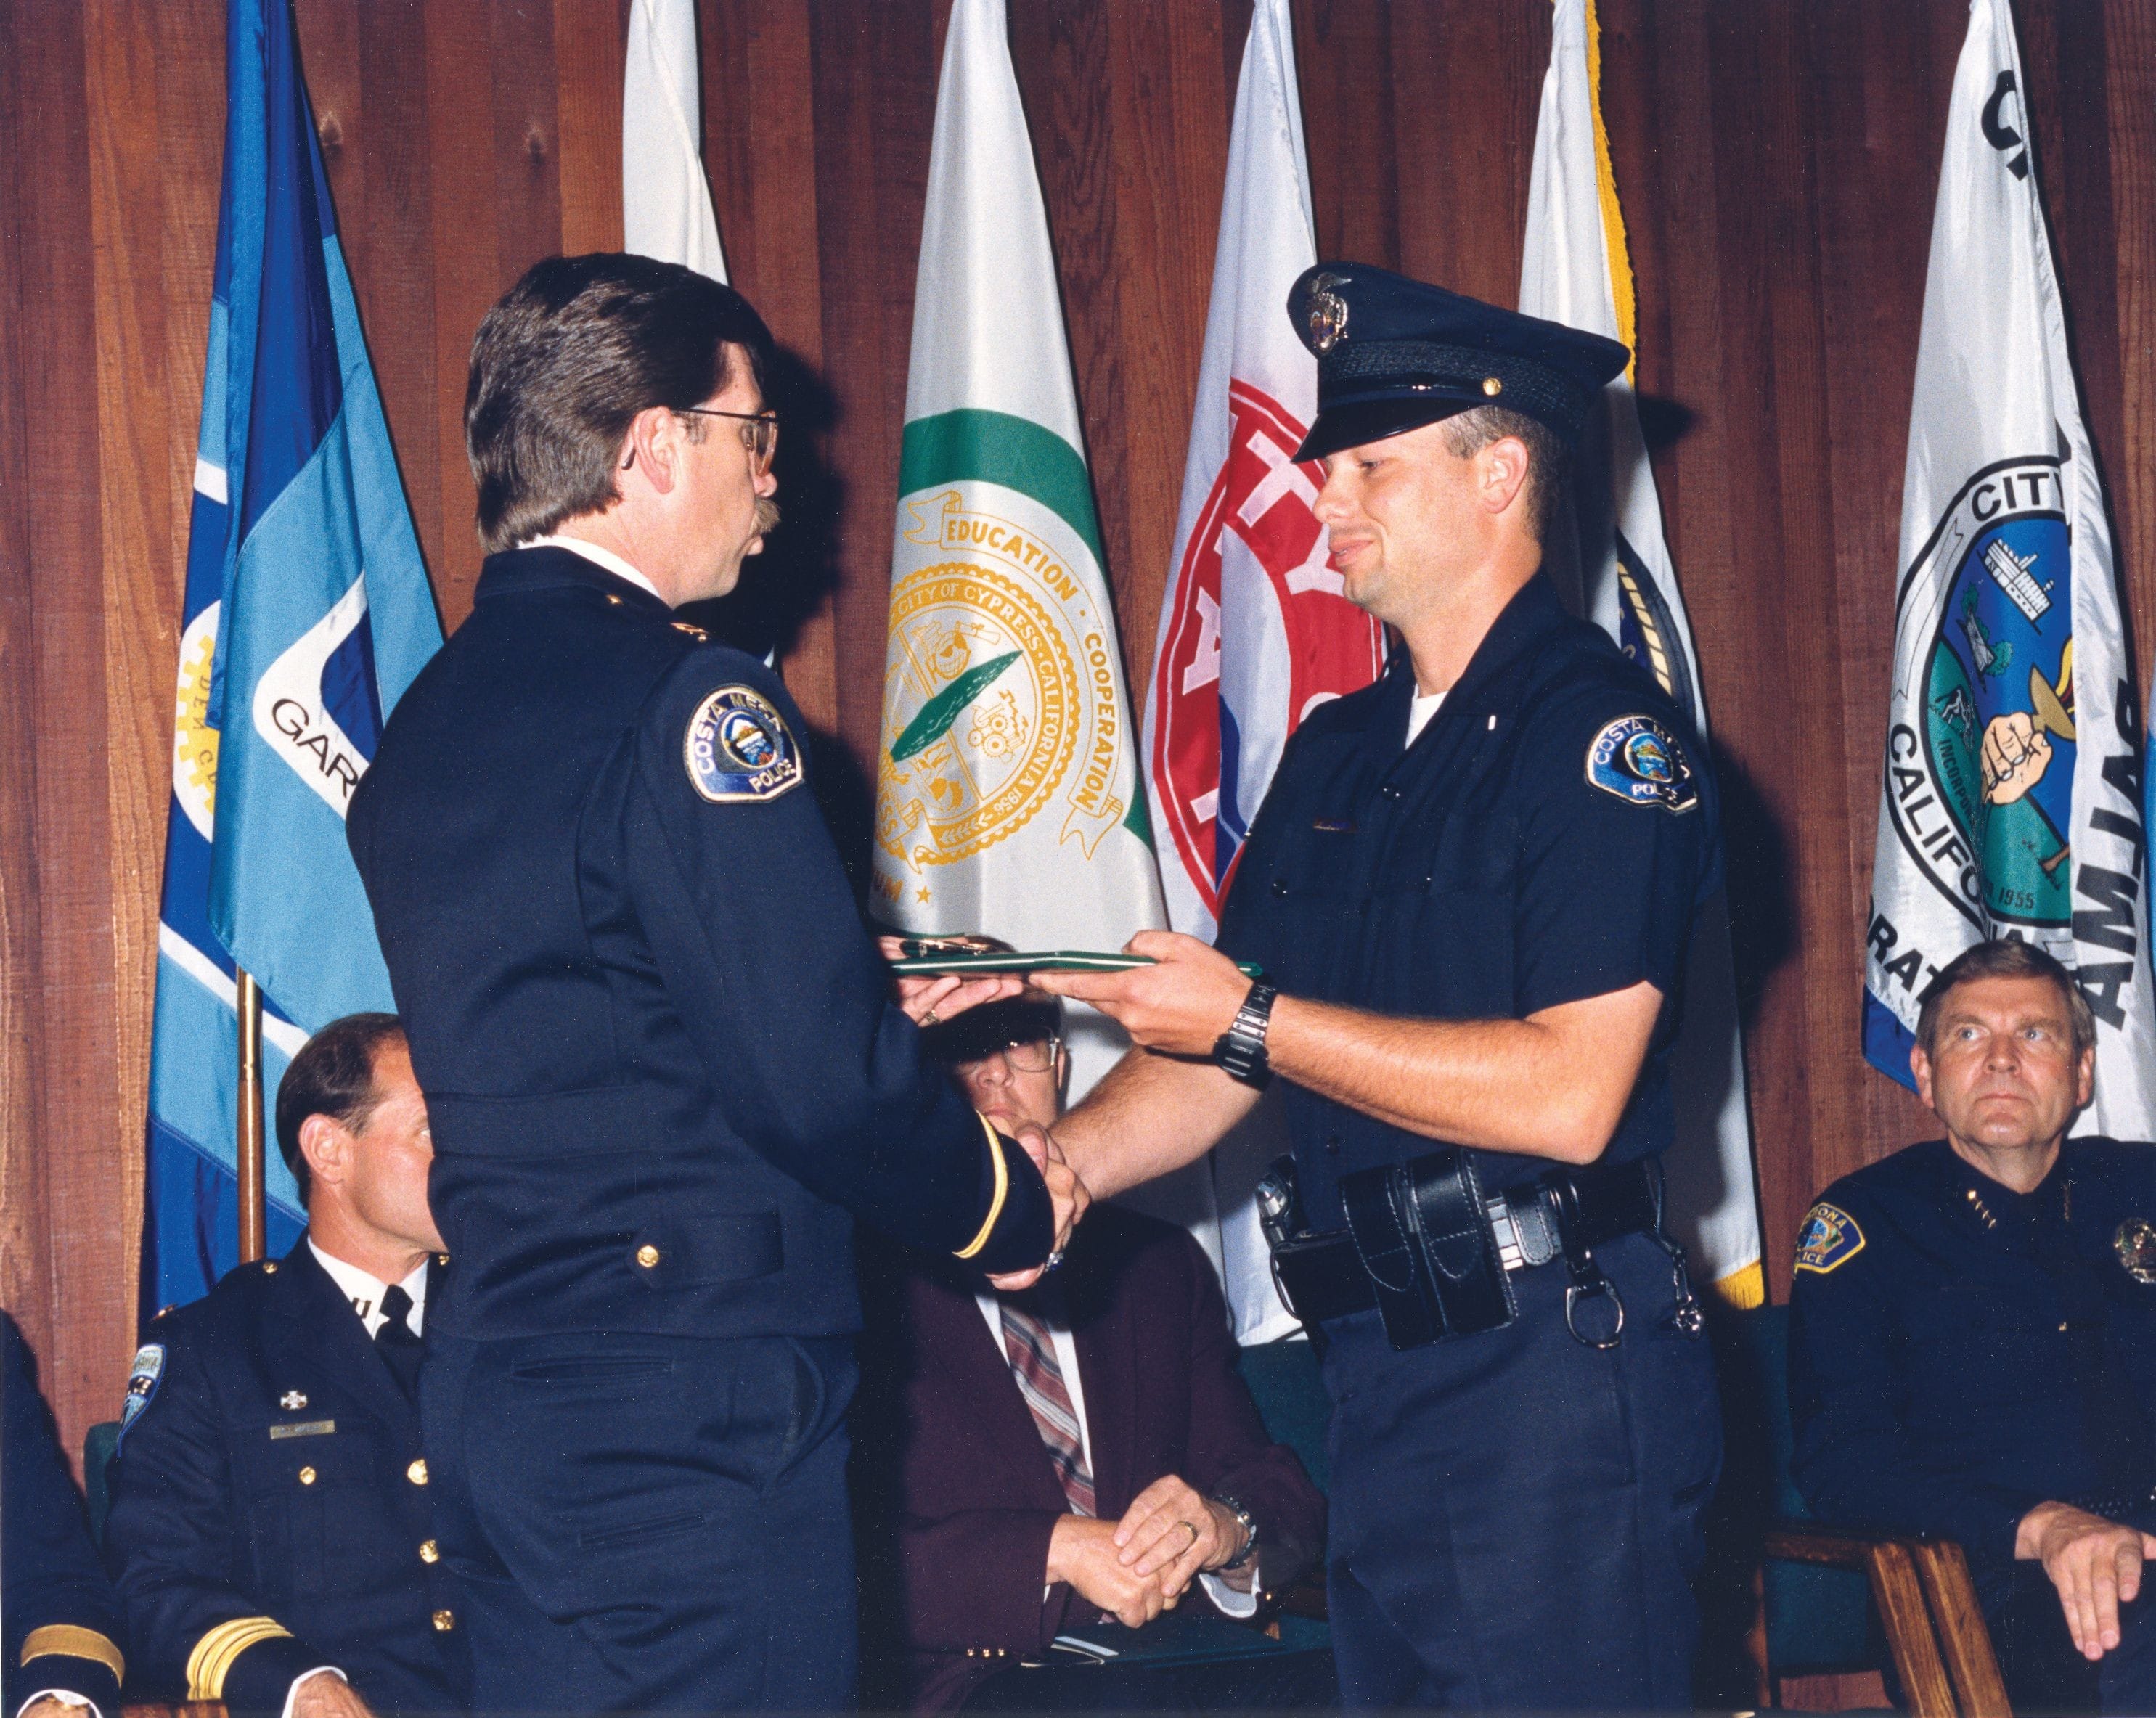 It's important that you have an instructor who went through the police academy. Jim (right) graduating here after 5 months of training in 1991.